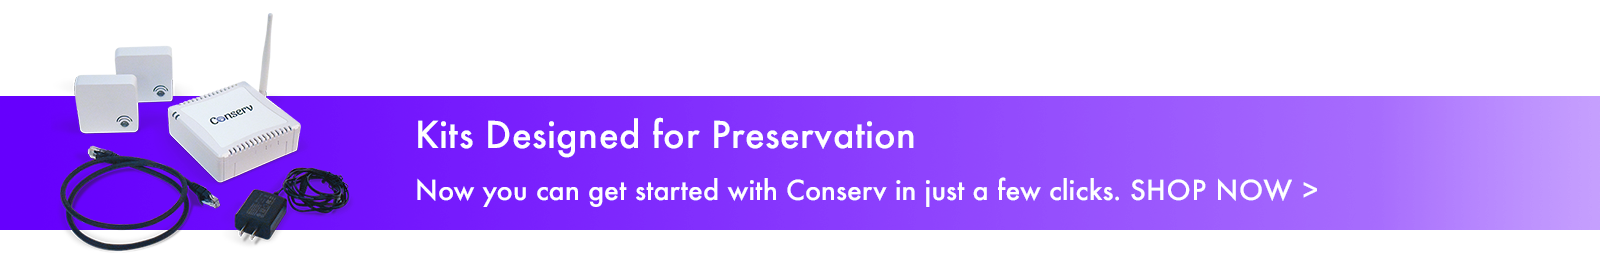 Kits designed for preservation! Now you can get started with Conserv in just a few clicks. SHOP NOW